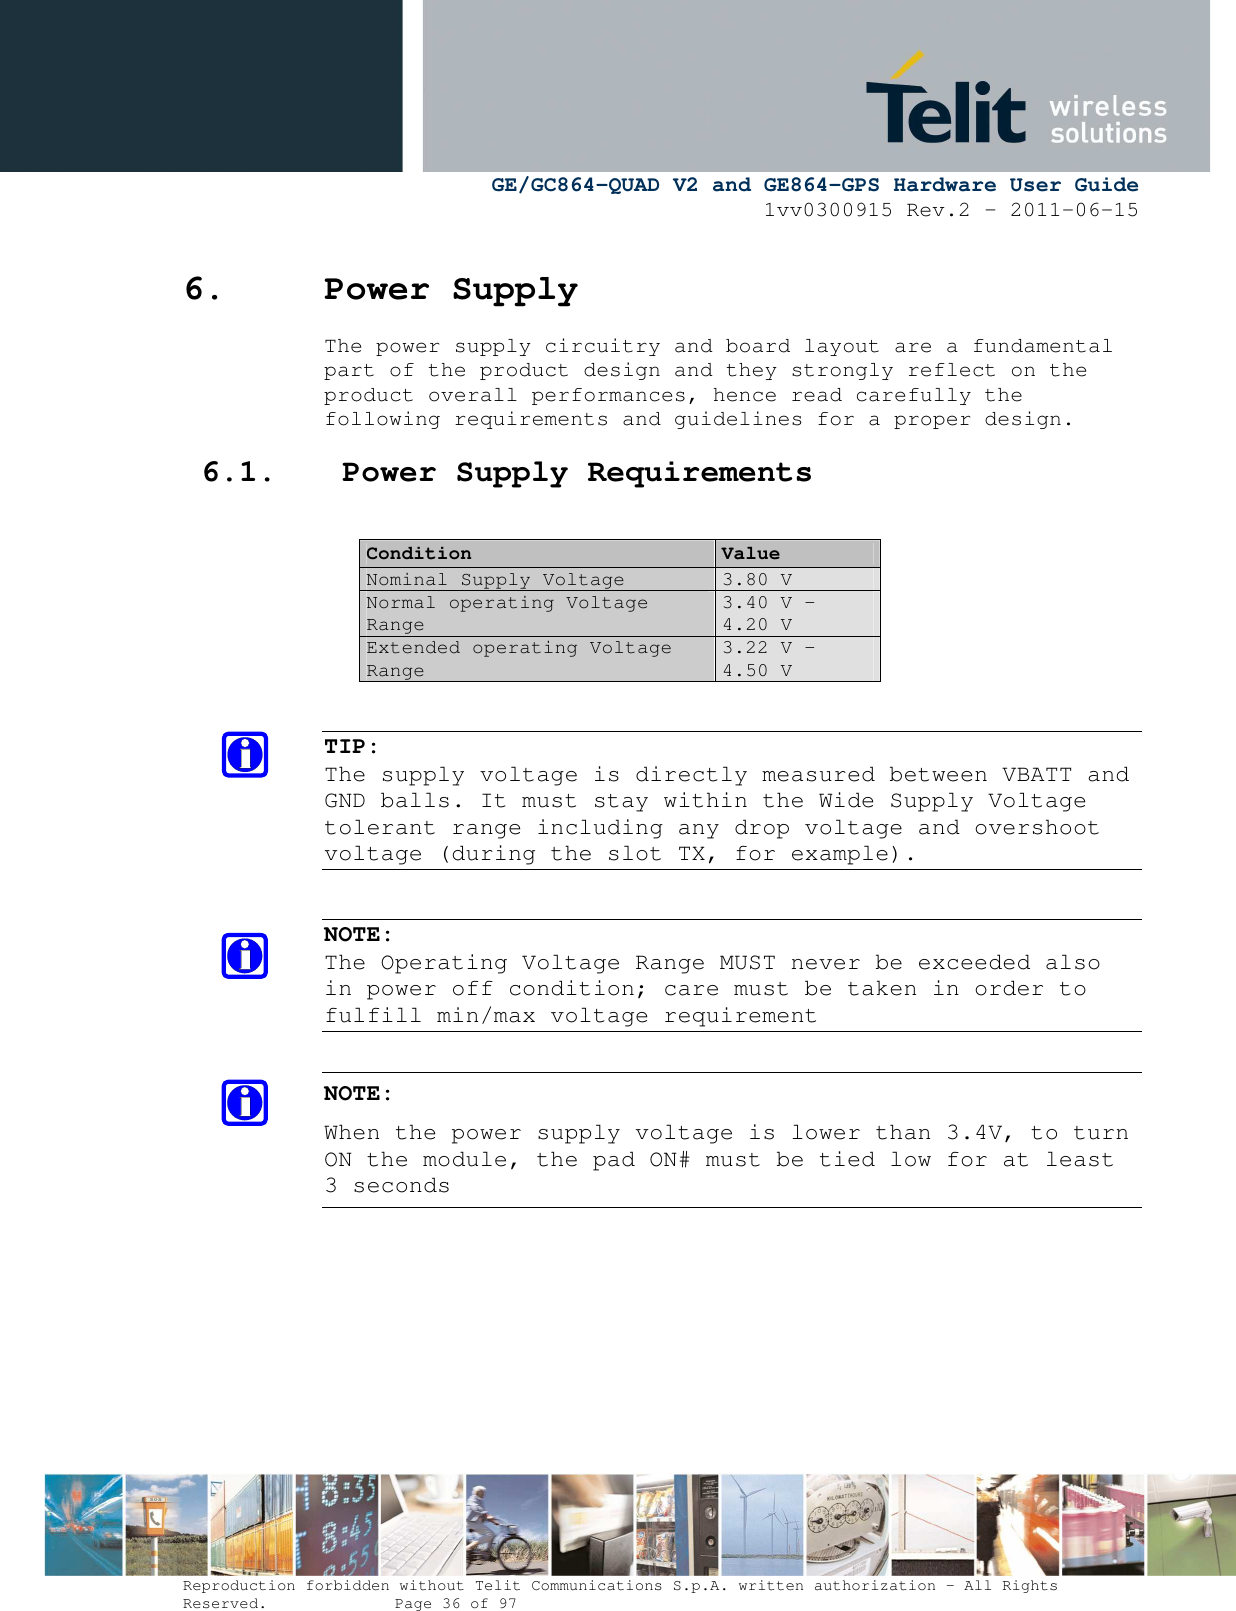      GE/GC864-QUAD V2 and GE864-GPS Hardware User Guide 1vv0300915 Rev.2 – 2011-06-15  Reproduction forbidden without Telit Communications S.p.A. written authorization - All Rights Reserved.    Page 36 of 97  6. Power Supply The power supply circuitry and board layout are a fundamental part of the product design and they strongly reflect on the product overall performances, hence read carefully the following requirements and guidelines for a proper design. 6.1. Power Supply Requirements  Condition  Value Nominal Supply Voltage 3.80 V Normal operating Voltage Range 3.40 V - 4.20 V Extended operating Voltage Range 3.22 V – 4.50 V   TIP:  The supply voltage is directly measured between VBATT and GND balls. It must stay within the Wide Supply Voltage tolerant range including any drop voltage and overshoot voltage (during the slot TX, for example).   NOTE: The Operating Voltage Range MUST never be exceeded also in power off condition; care must be taken in order to fulfill min/max voltage requirement  NOTE:  When the power supply voltage is lower than 3.4V, to turn ON the module, the pad ON# must be tied low for at least 3 seconds 